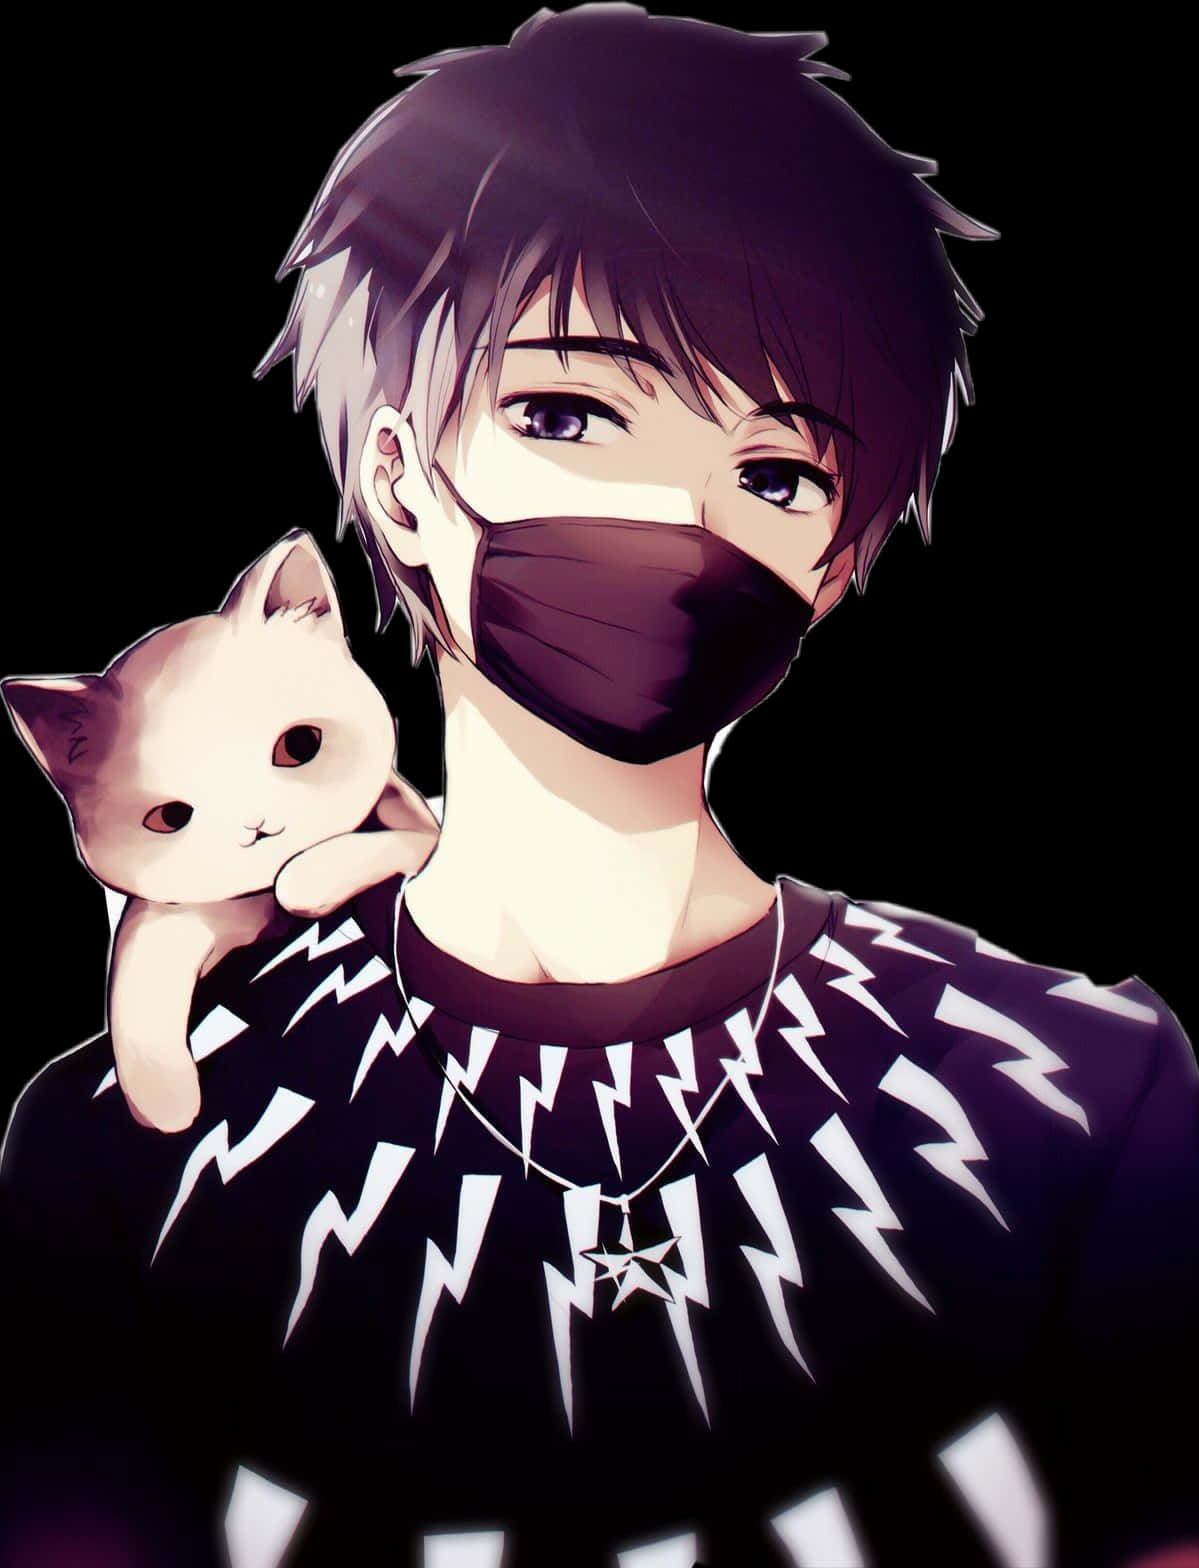 Mask Boy Kpop Anime With Cat Background